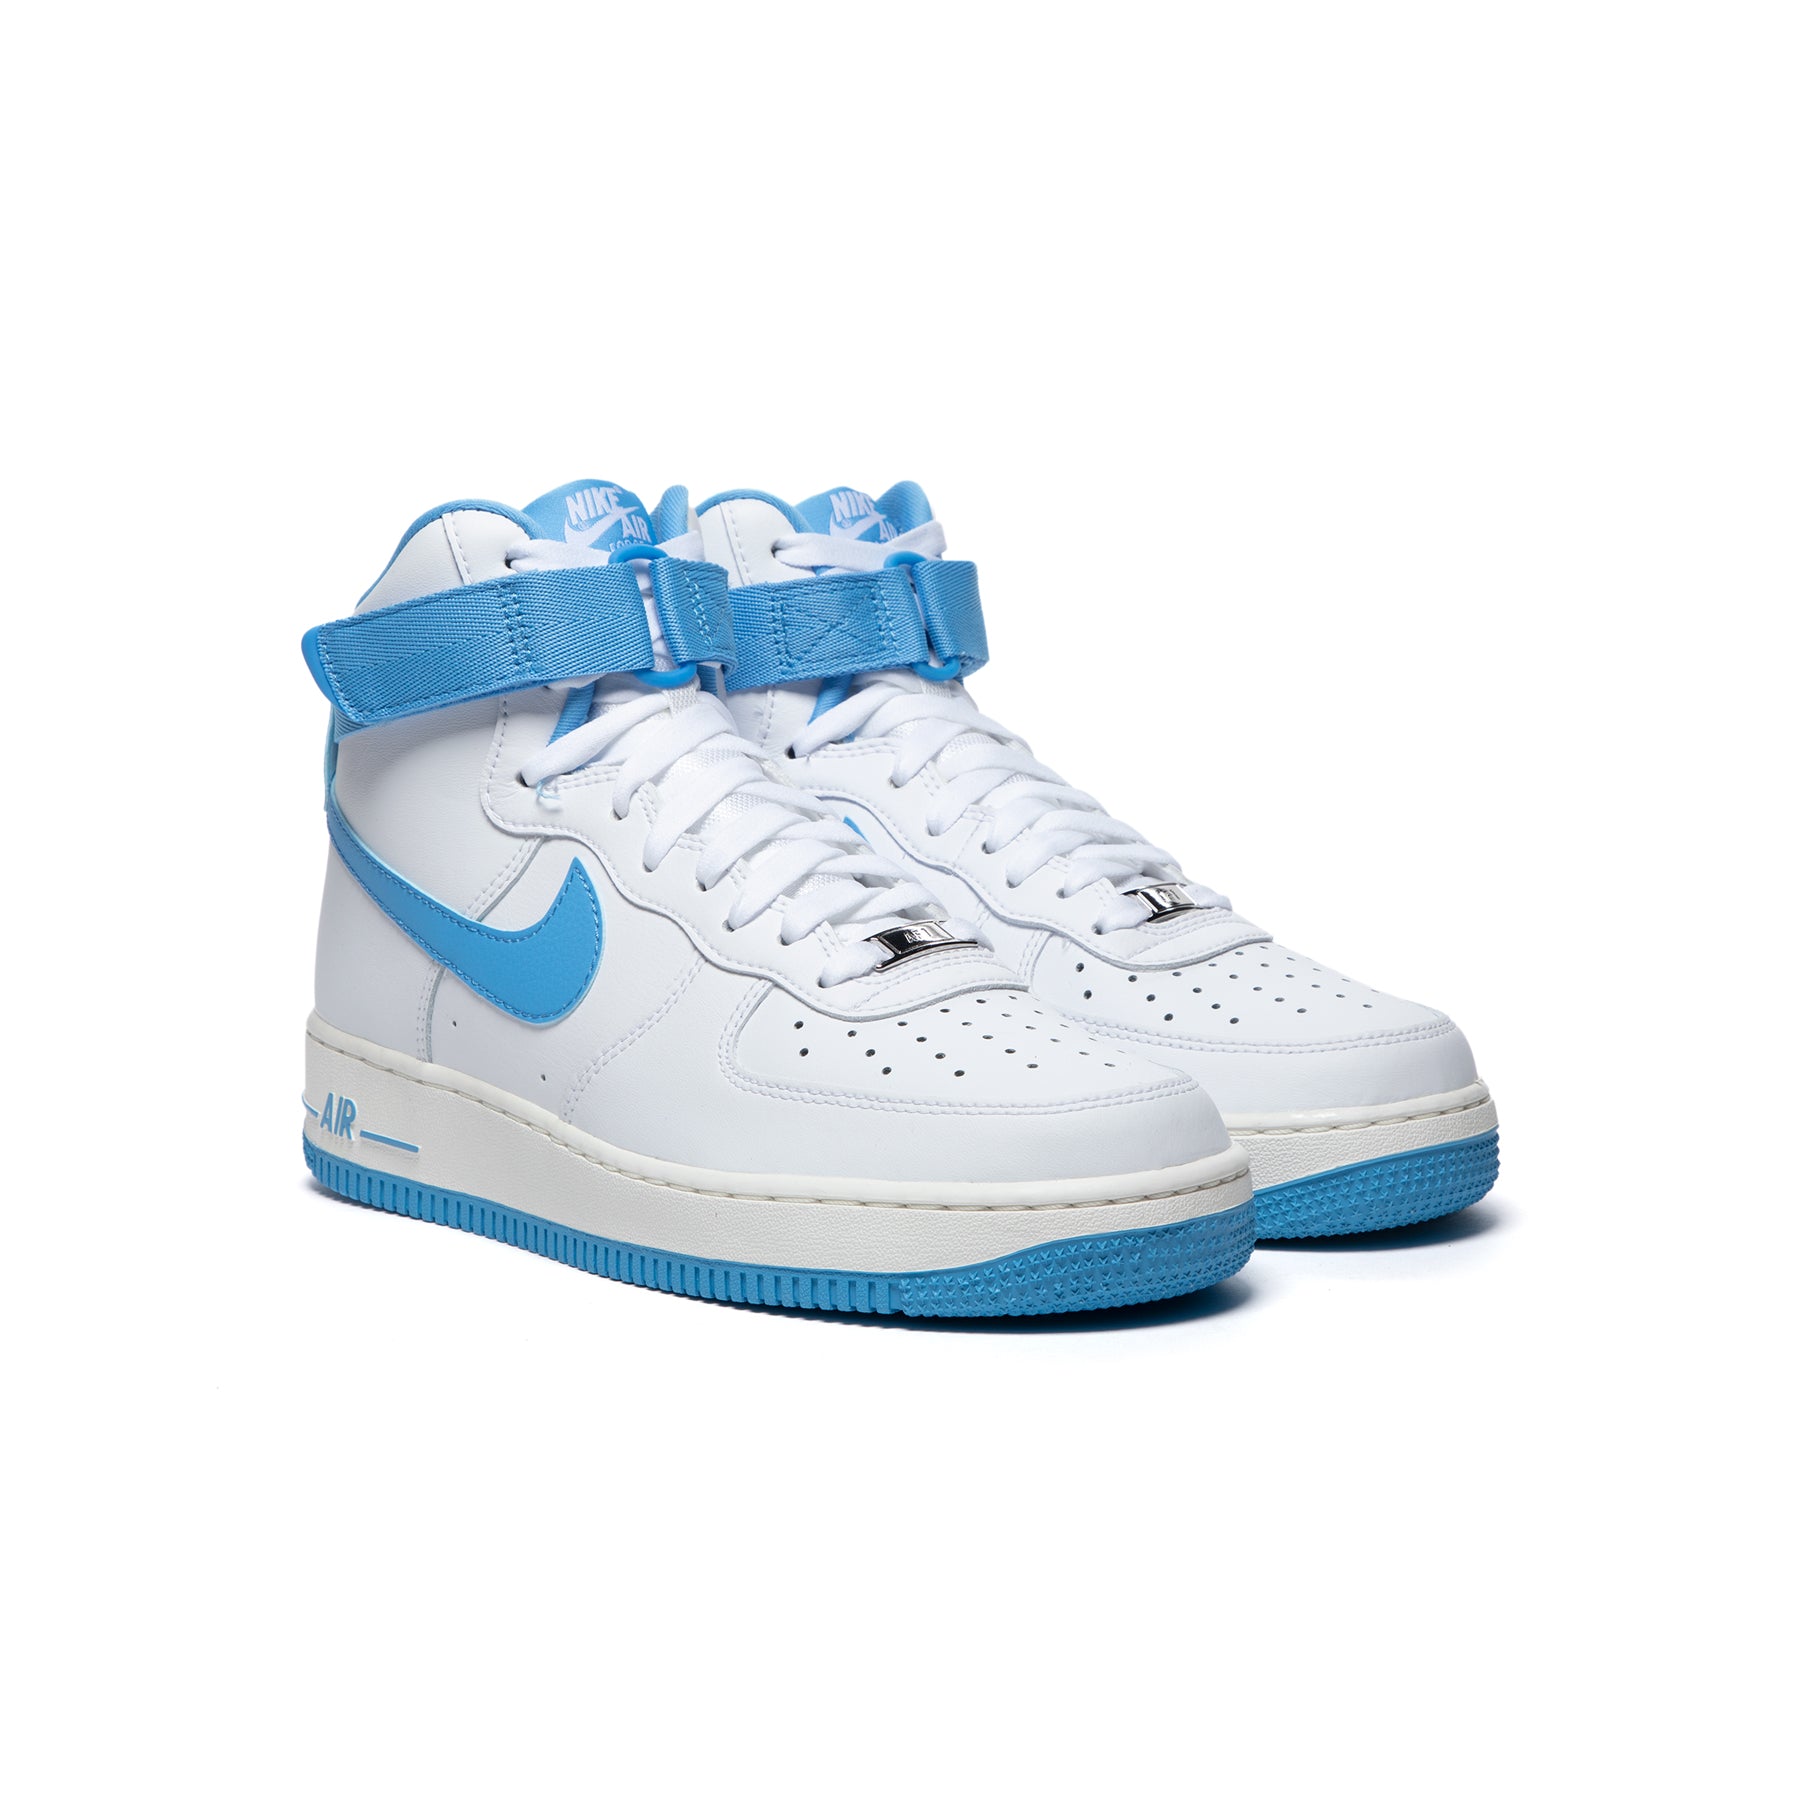 Buy Nike Air Force 1 High Womens Shoes, White/Matte Silver/Blue